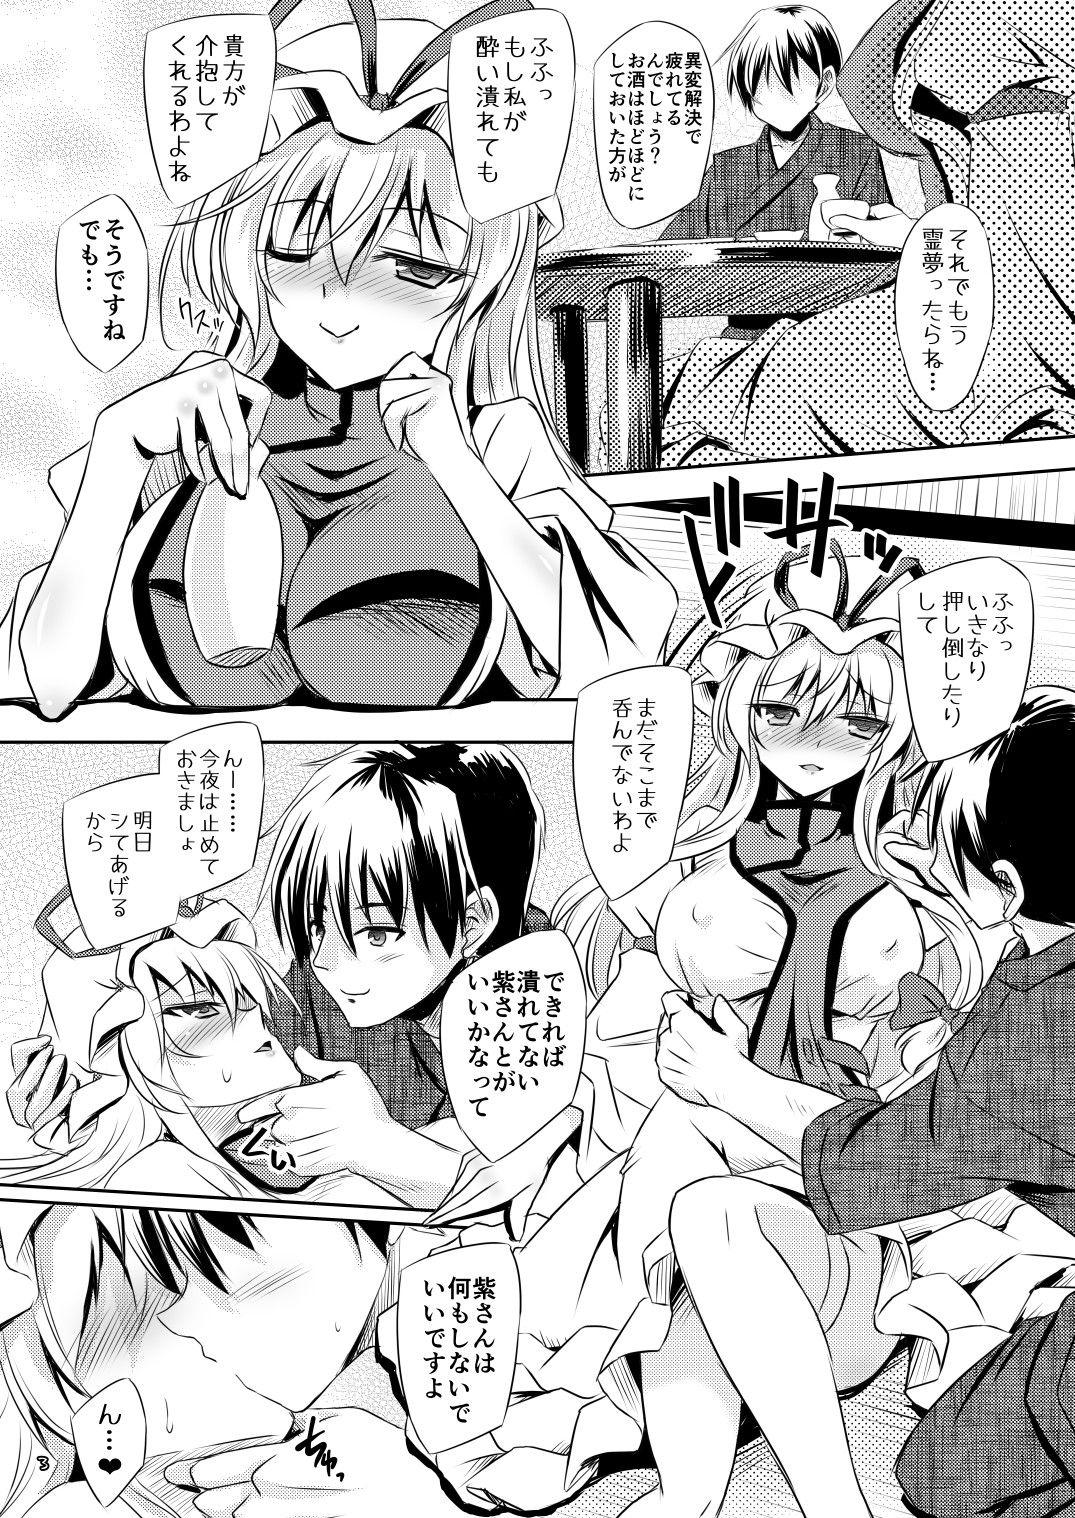 Skinny Kenja no Tame no Prelude - Touhou project Khmer - Page 3